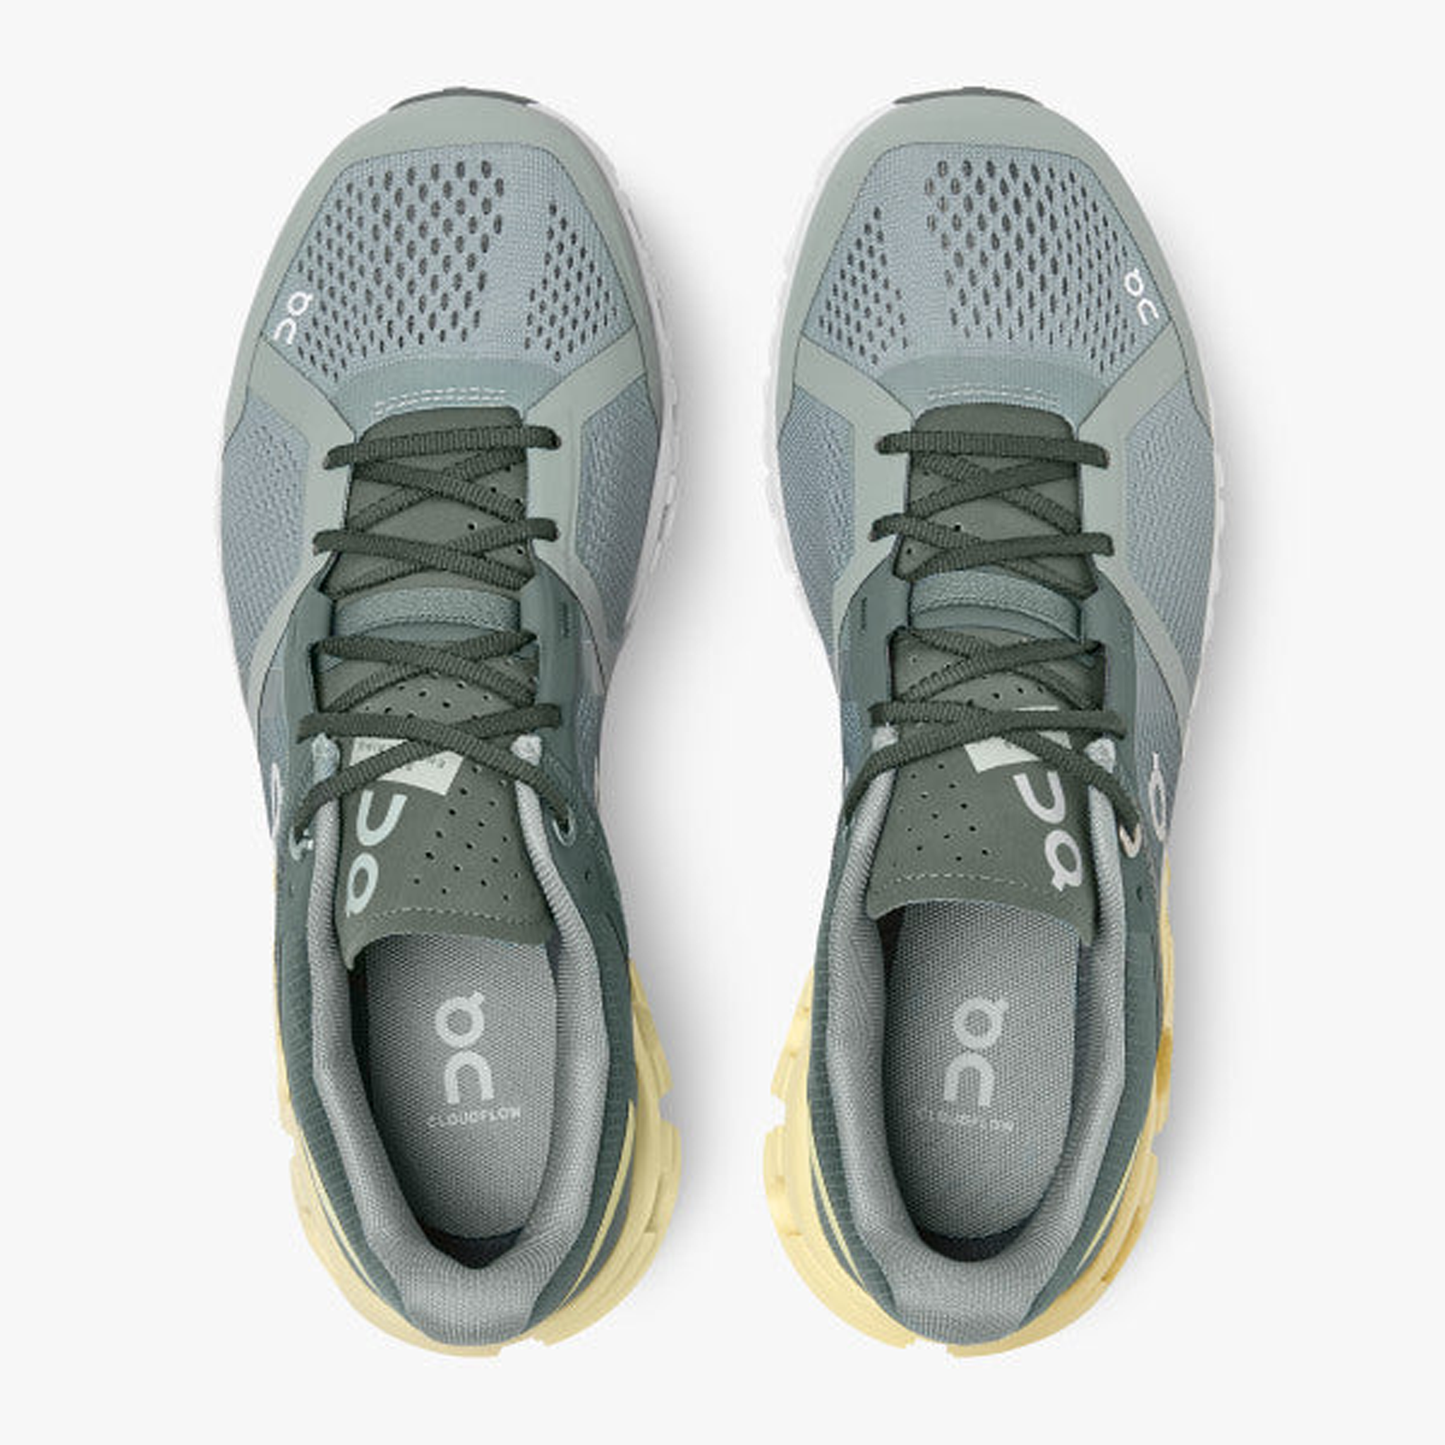 top view of The Women's On Cloudflow running shoes in the colour sea/limelight